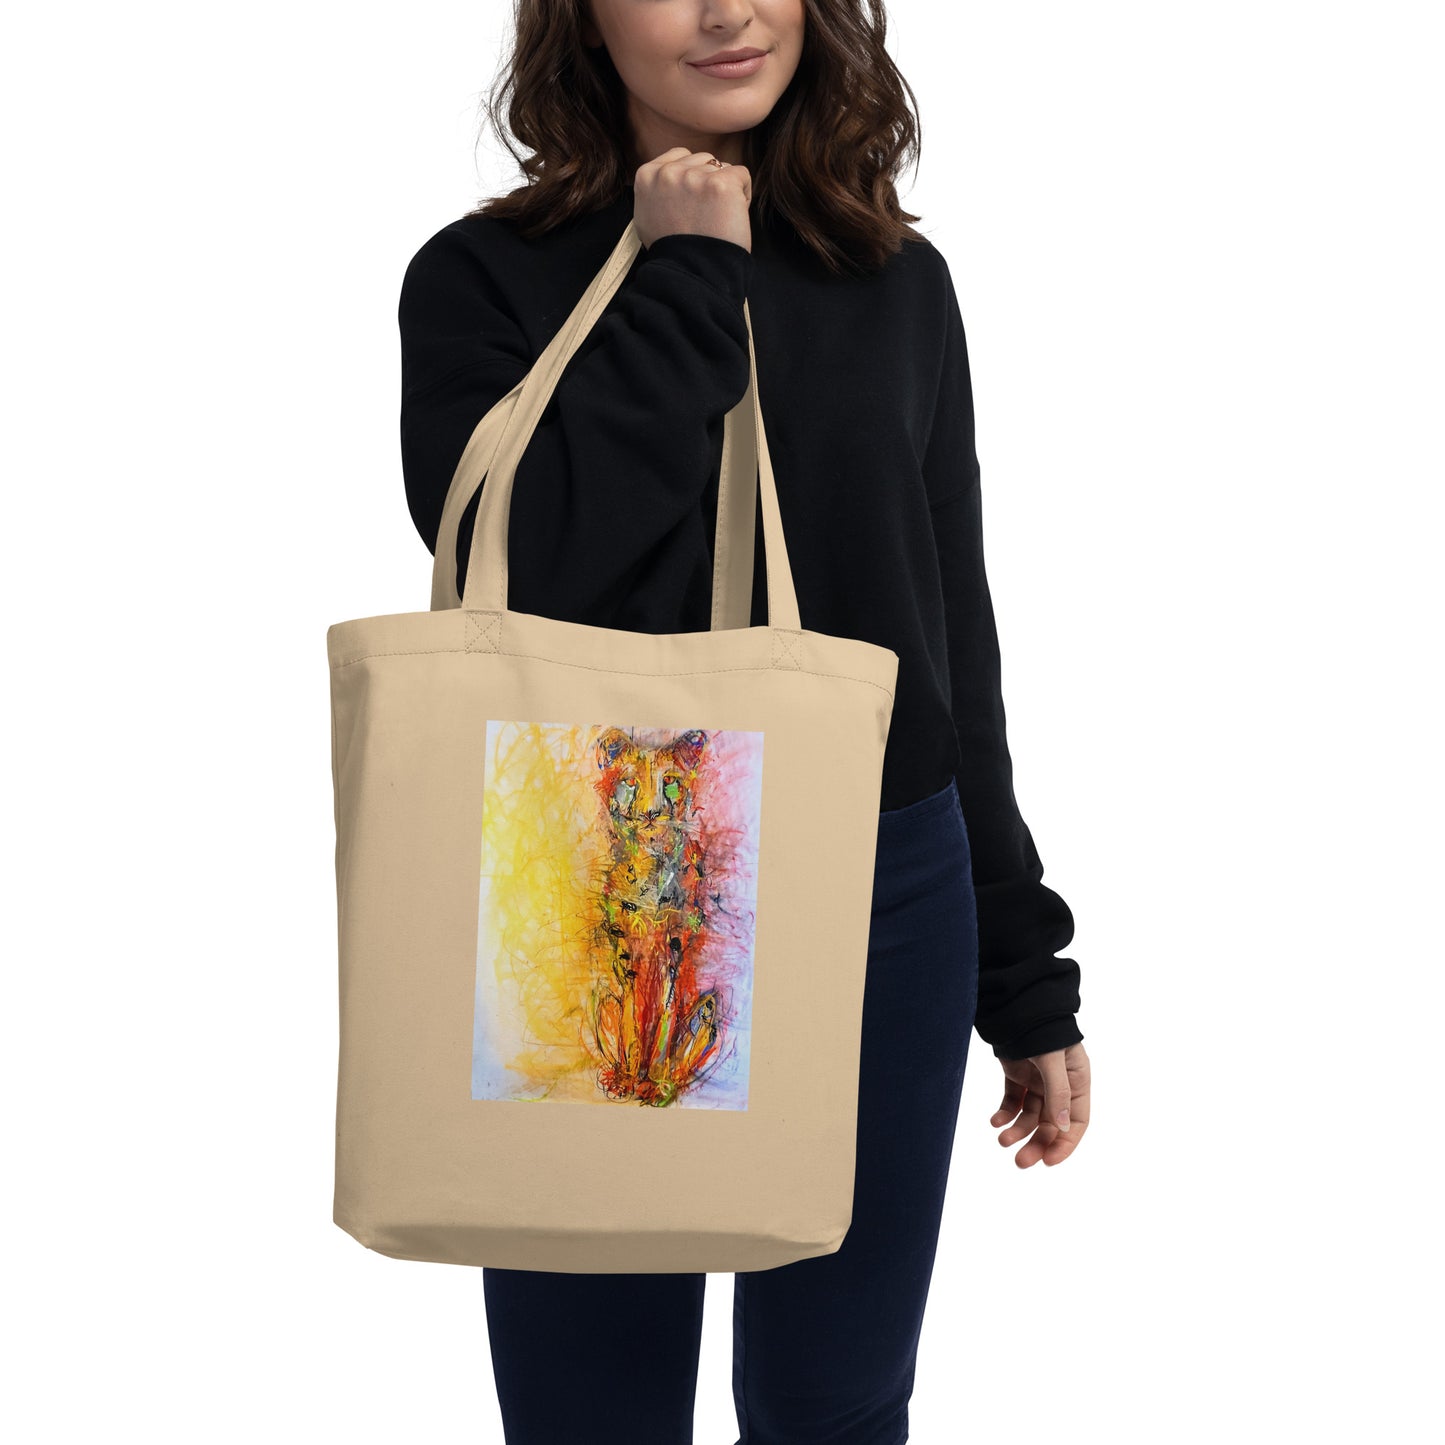 Oatmeal tote bag 100% certified organic cotton with exclusive artwork "The Long Wait" print 